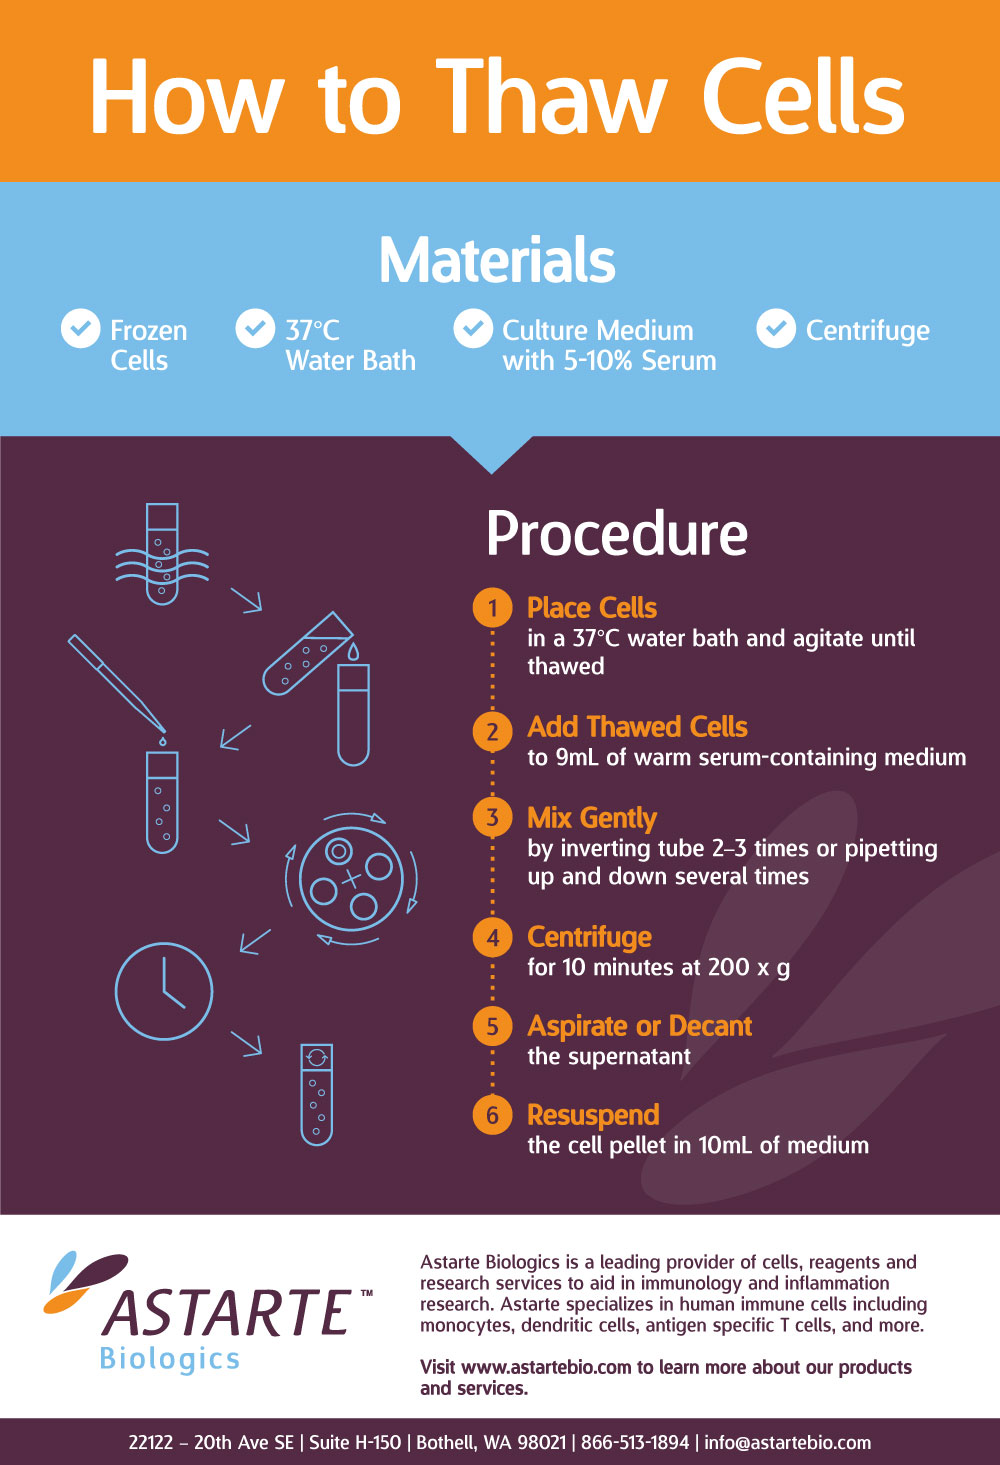 How to Thaw Cells infographic